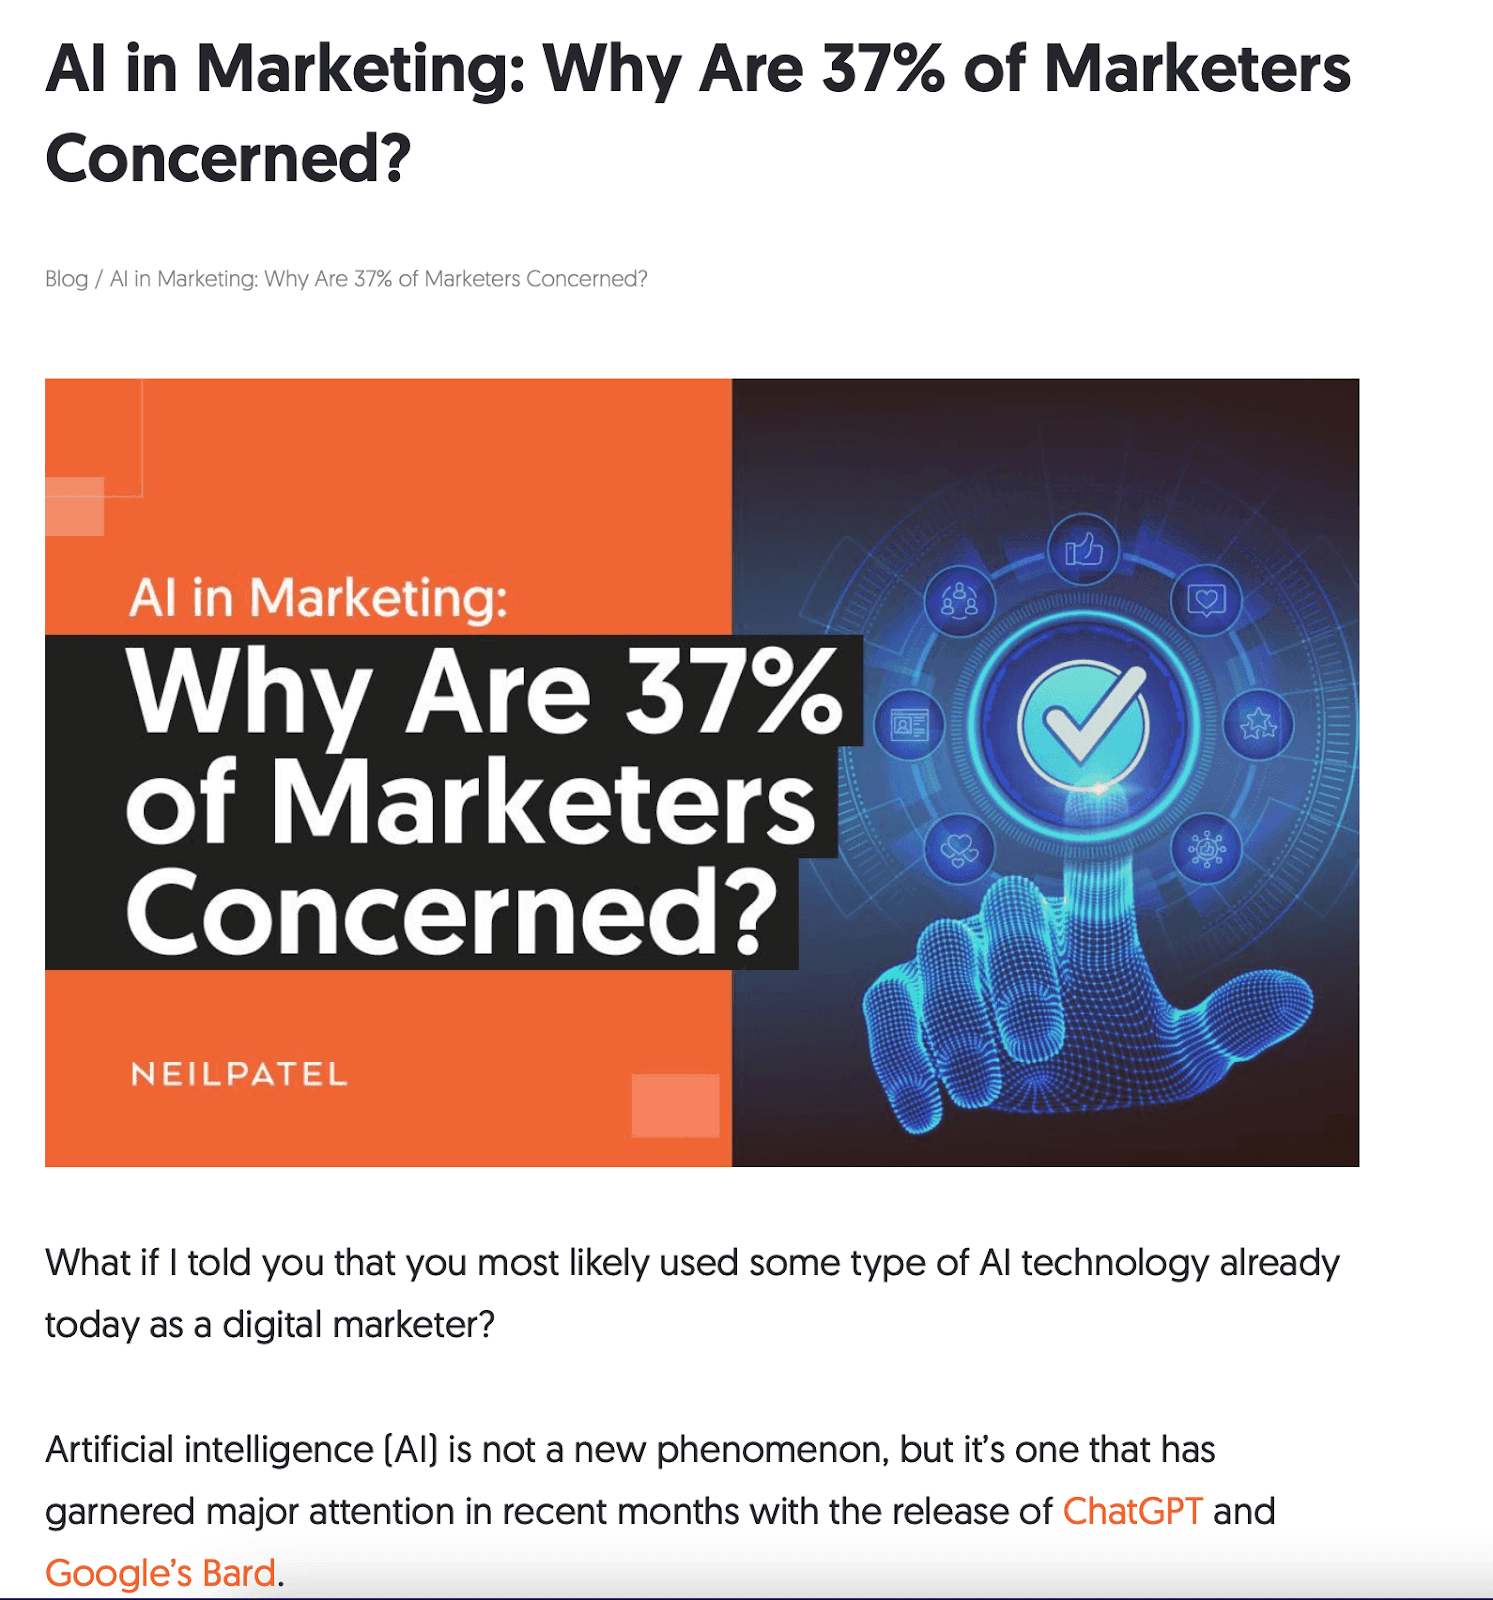 AI in marketing: Why Are 37% of Marketers Concerned? 